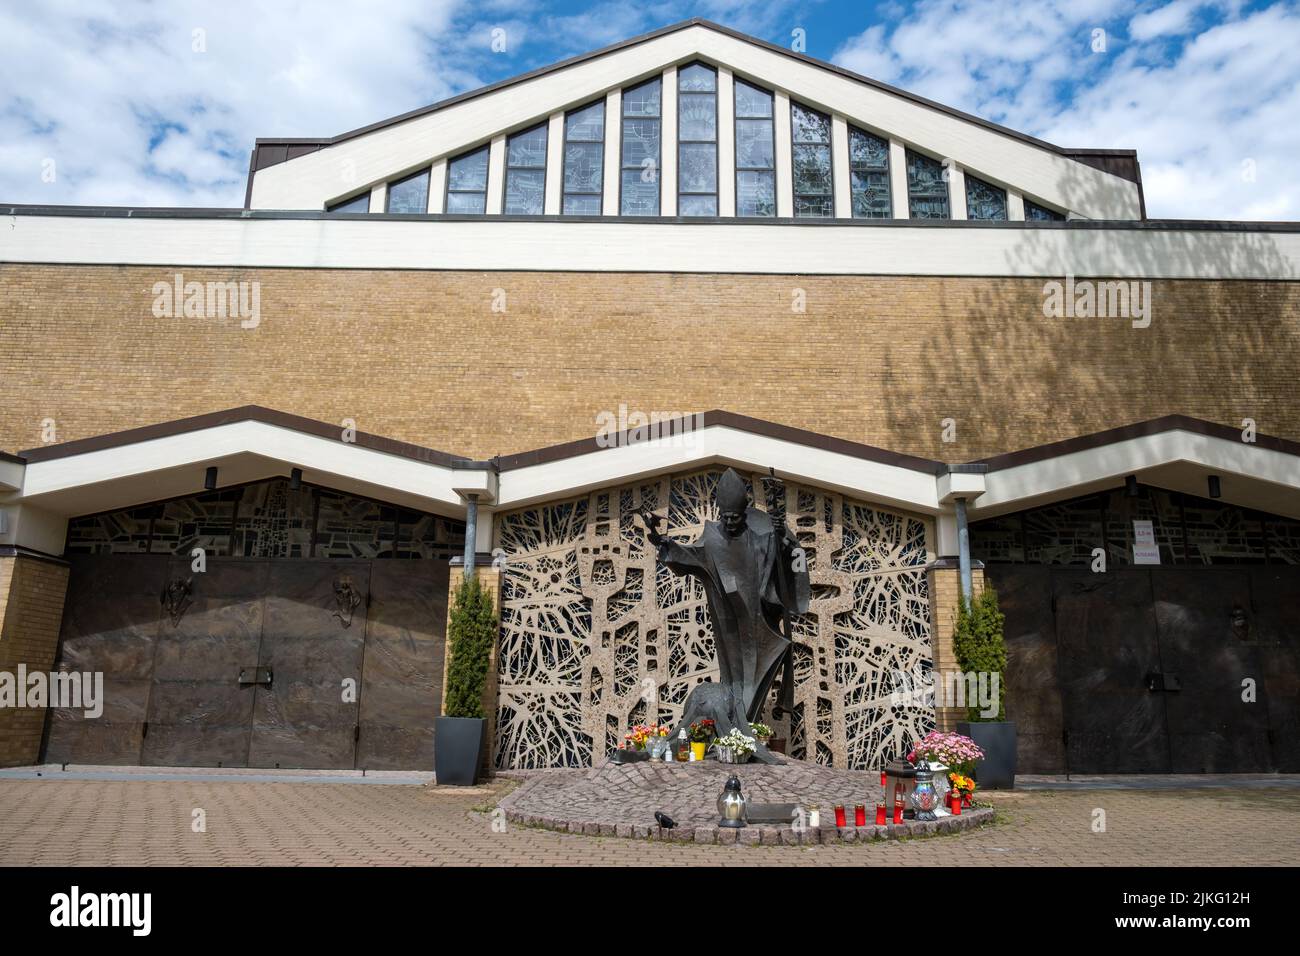 10.05.2021, Germany, Lower Saxony, Hanover - Building of the Polish Catholic Mission, sculpture of Pope John Paul II in the center. 00A210510D233CAROE Stock Photo